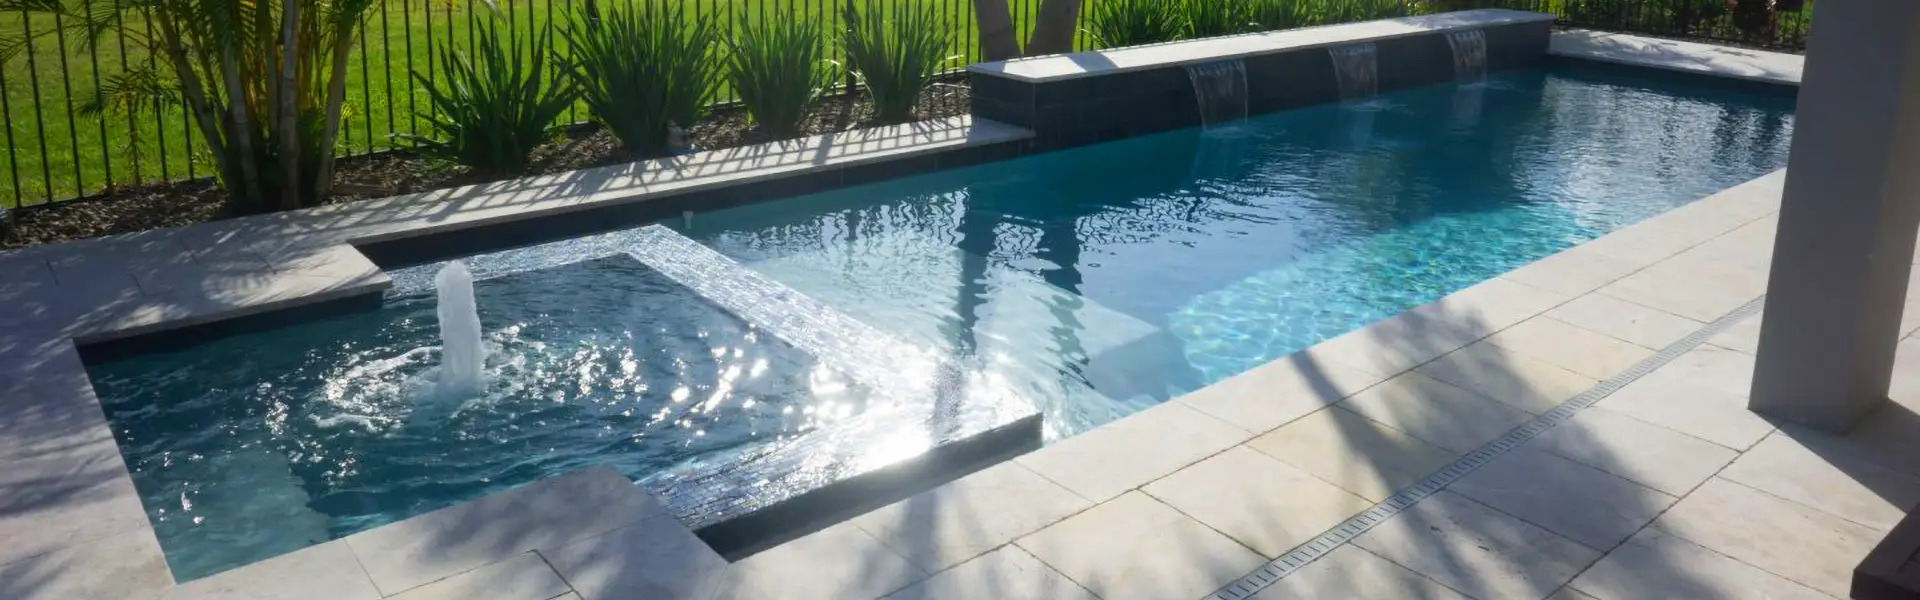 Unlock the Mystery: How Long is a Lap Pool Standard Length?